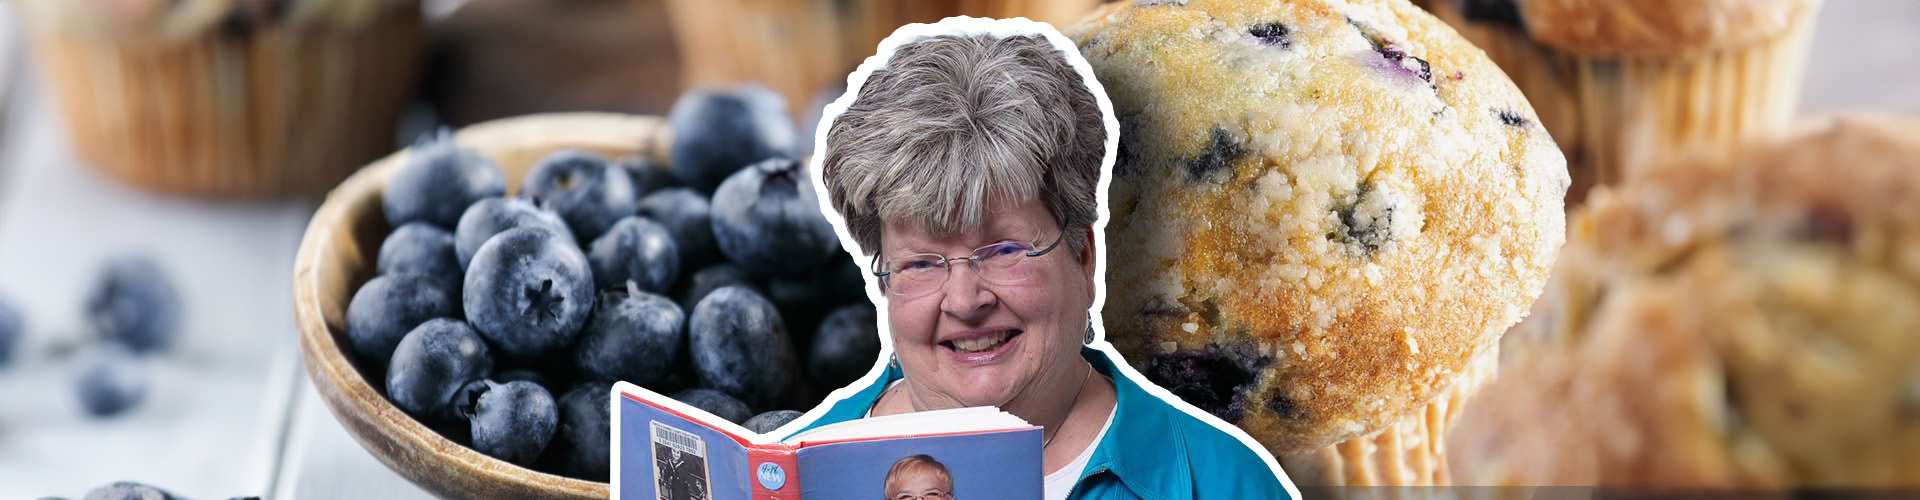 foodie find blueberry muffin featured